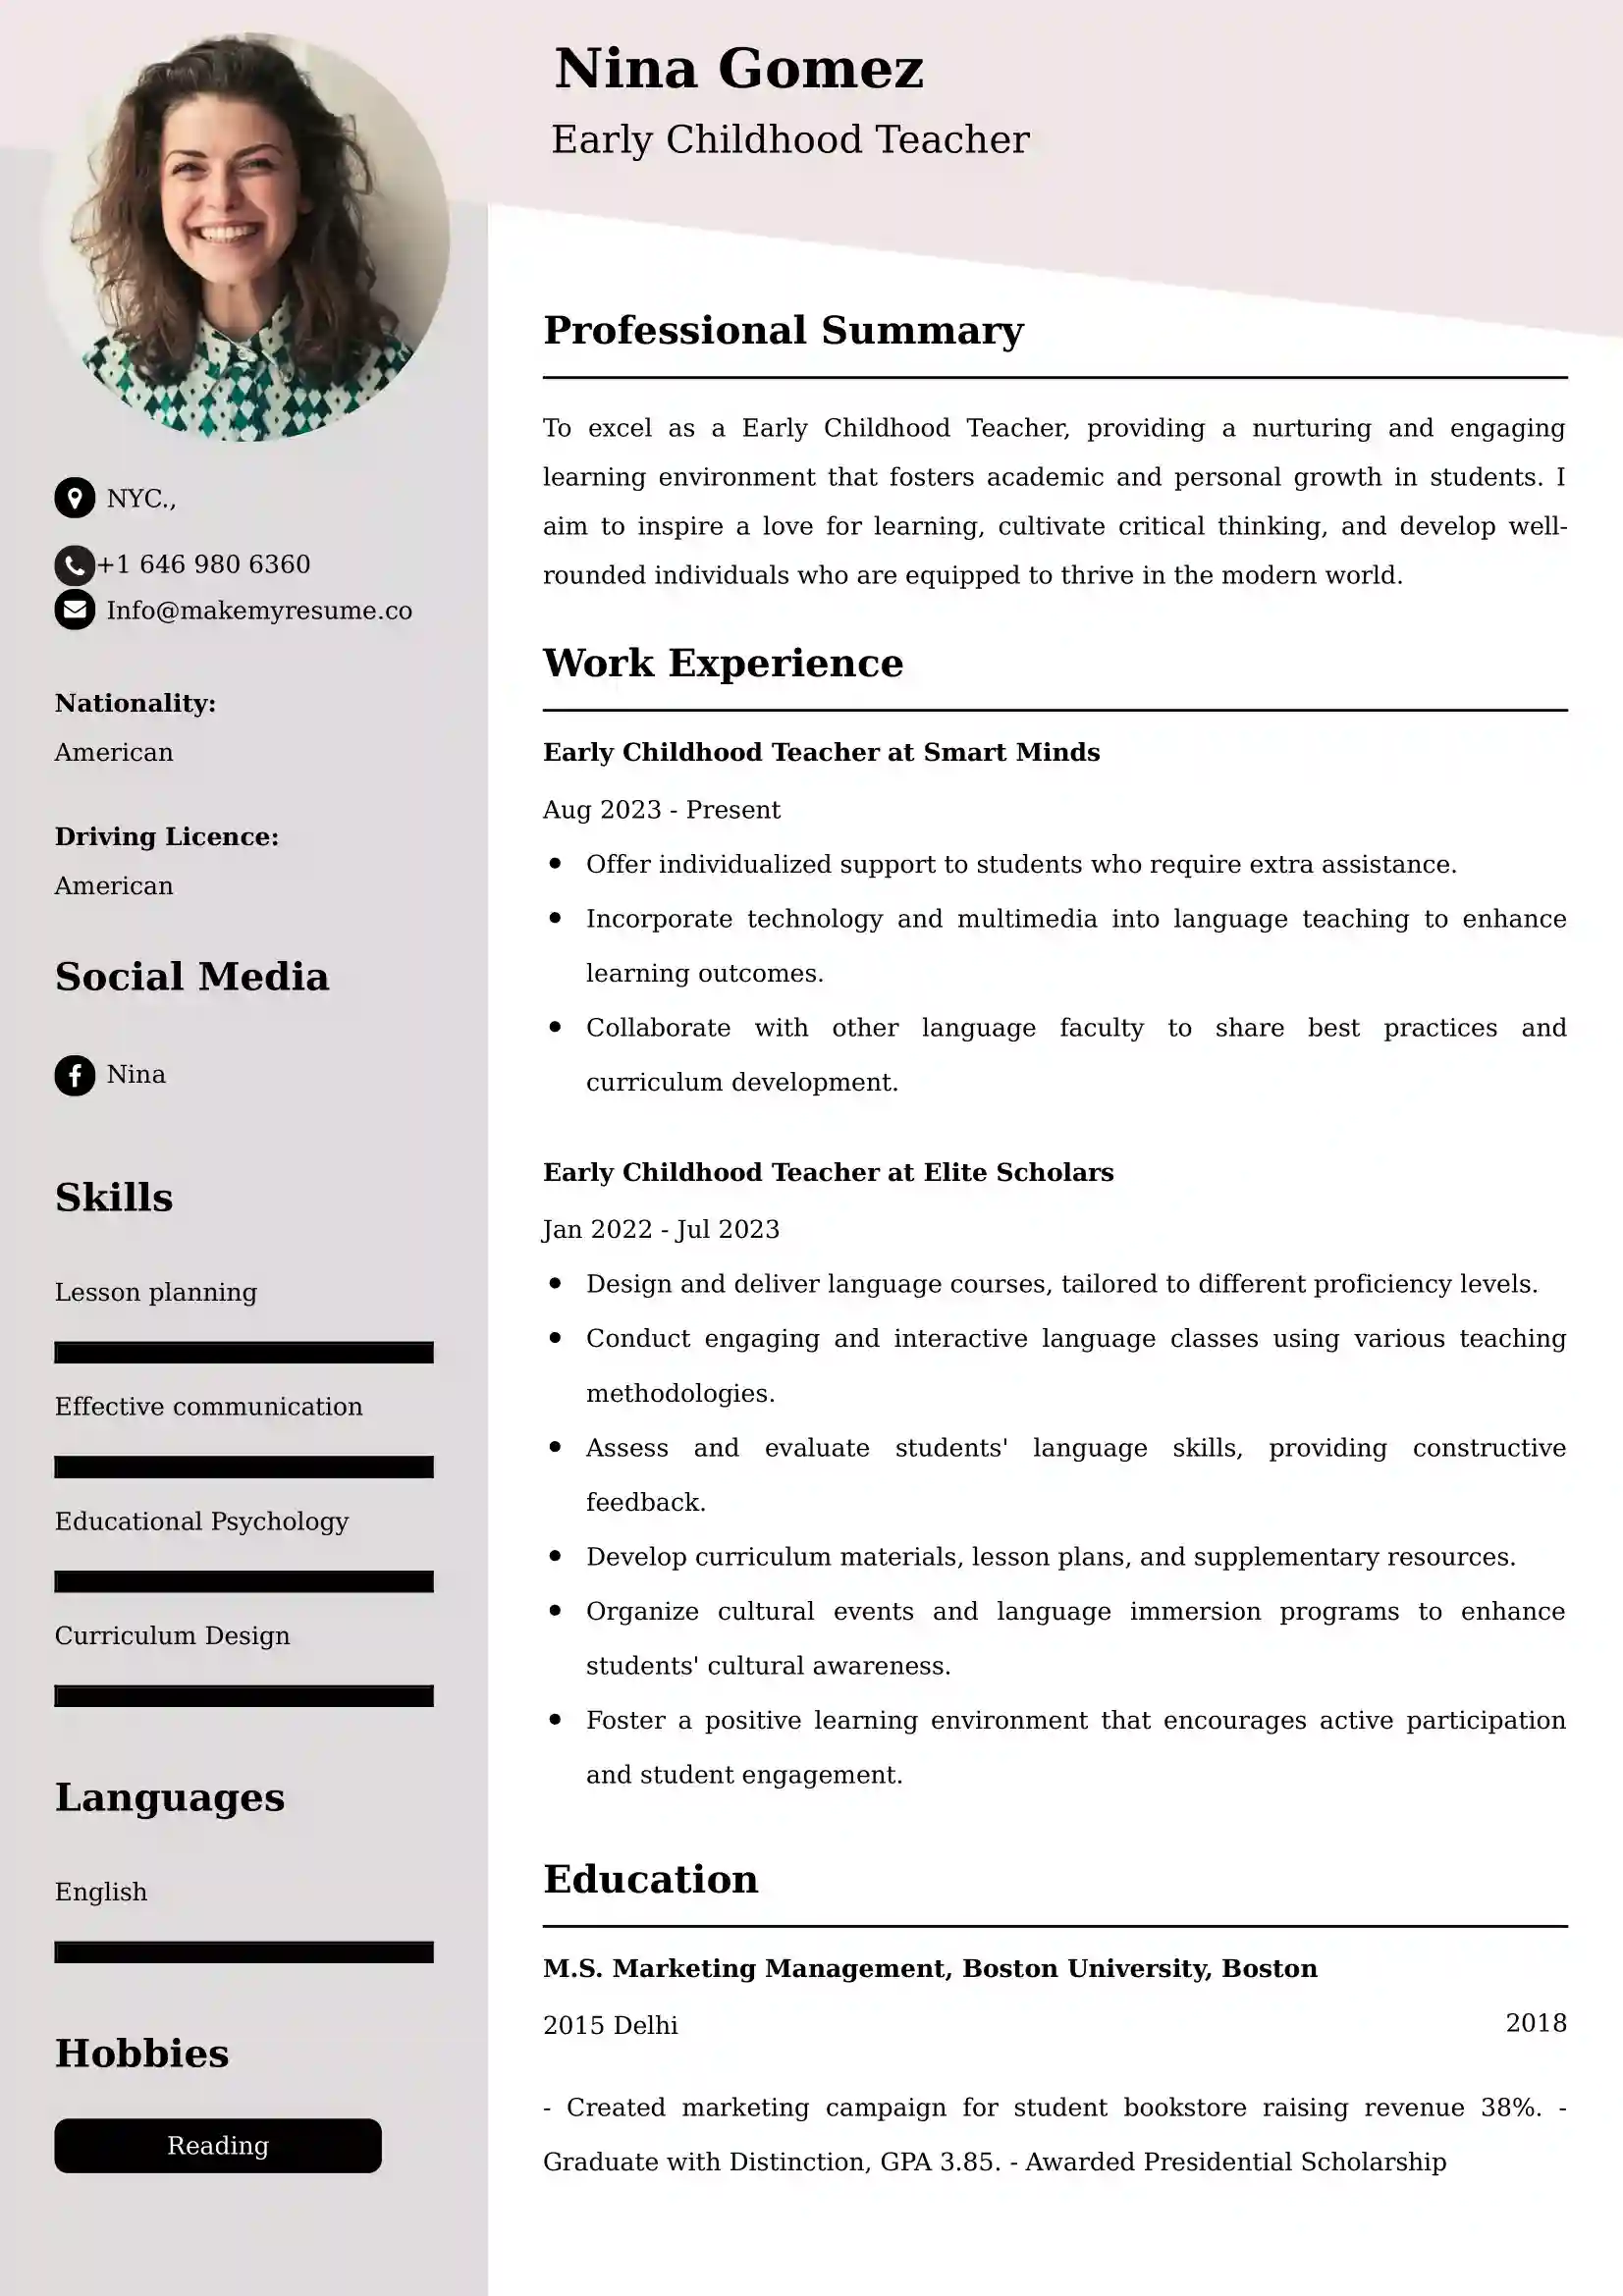 Early Childhood Teacher Resume Examples - Brazilian Format, Latest Template